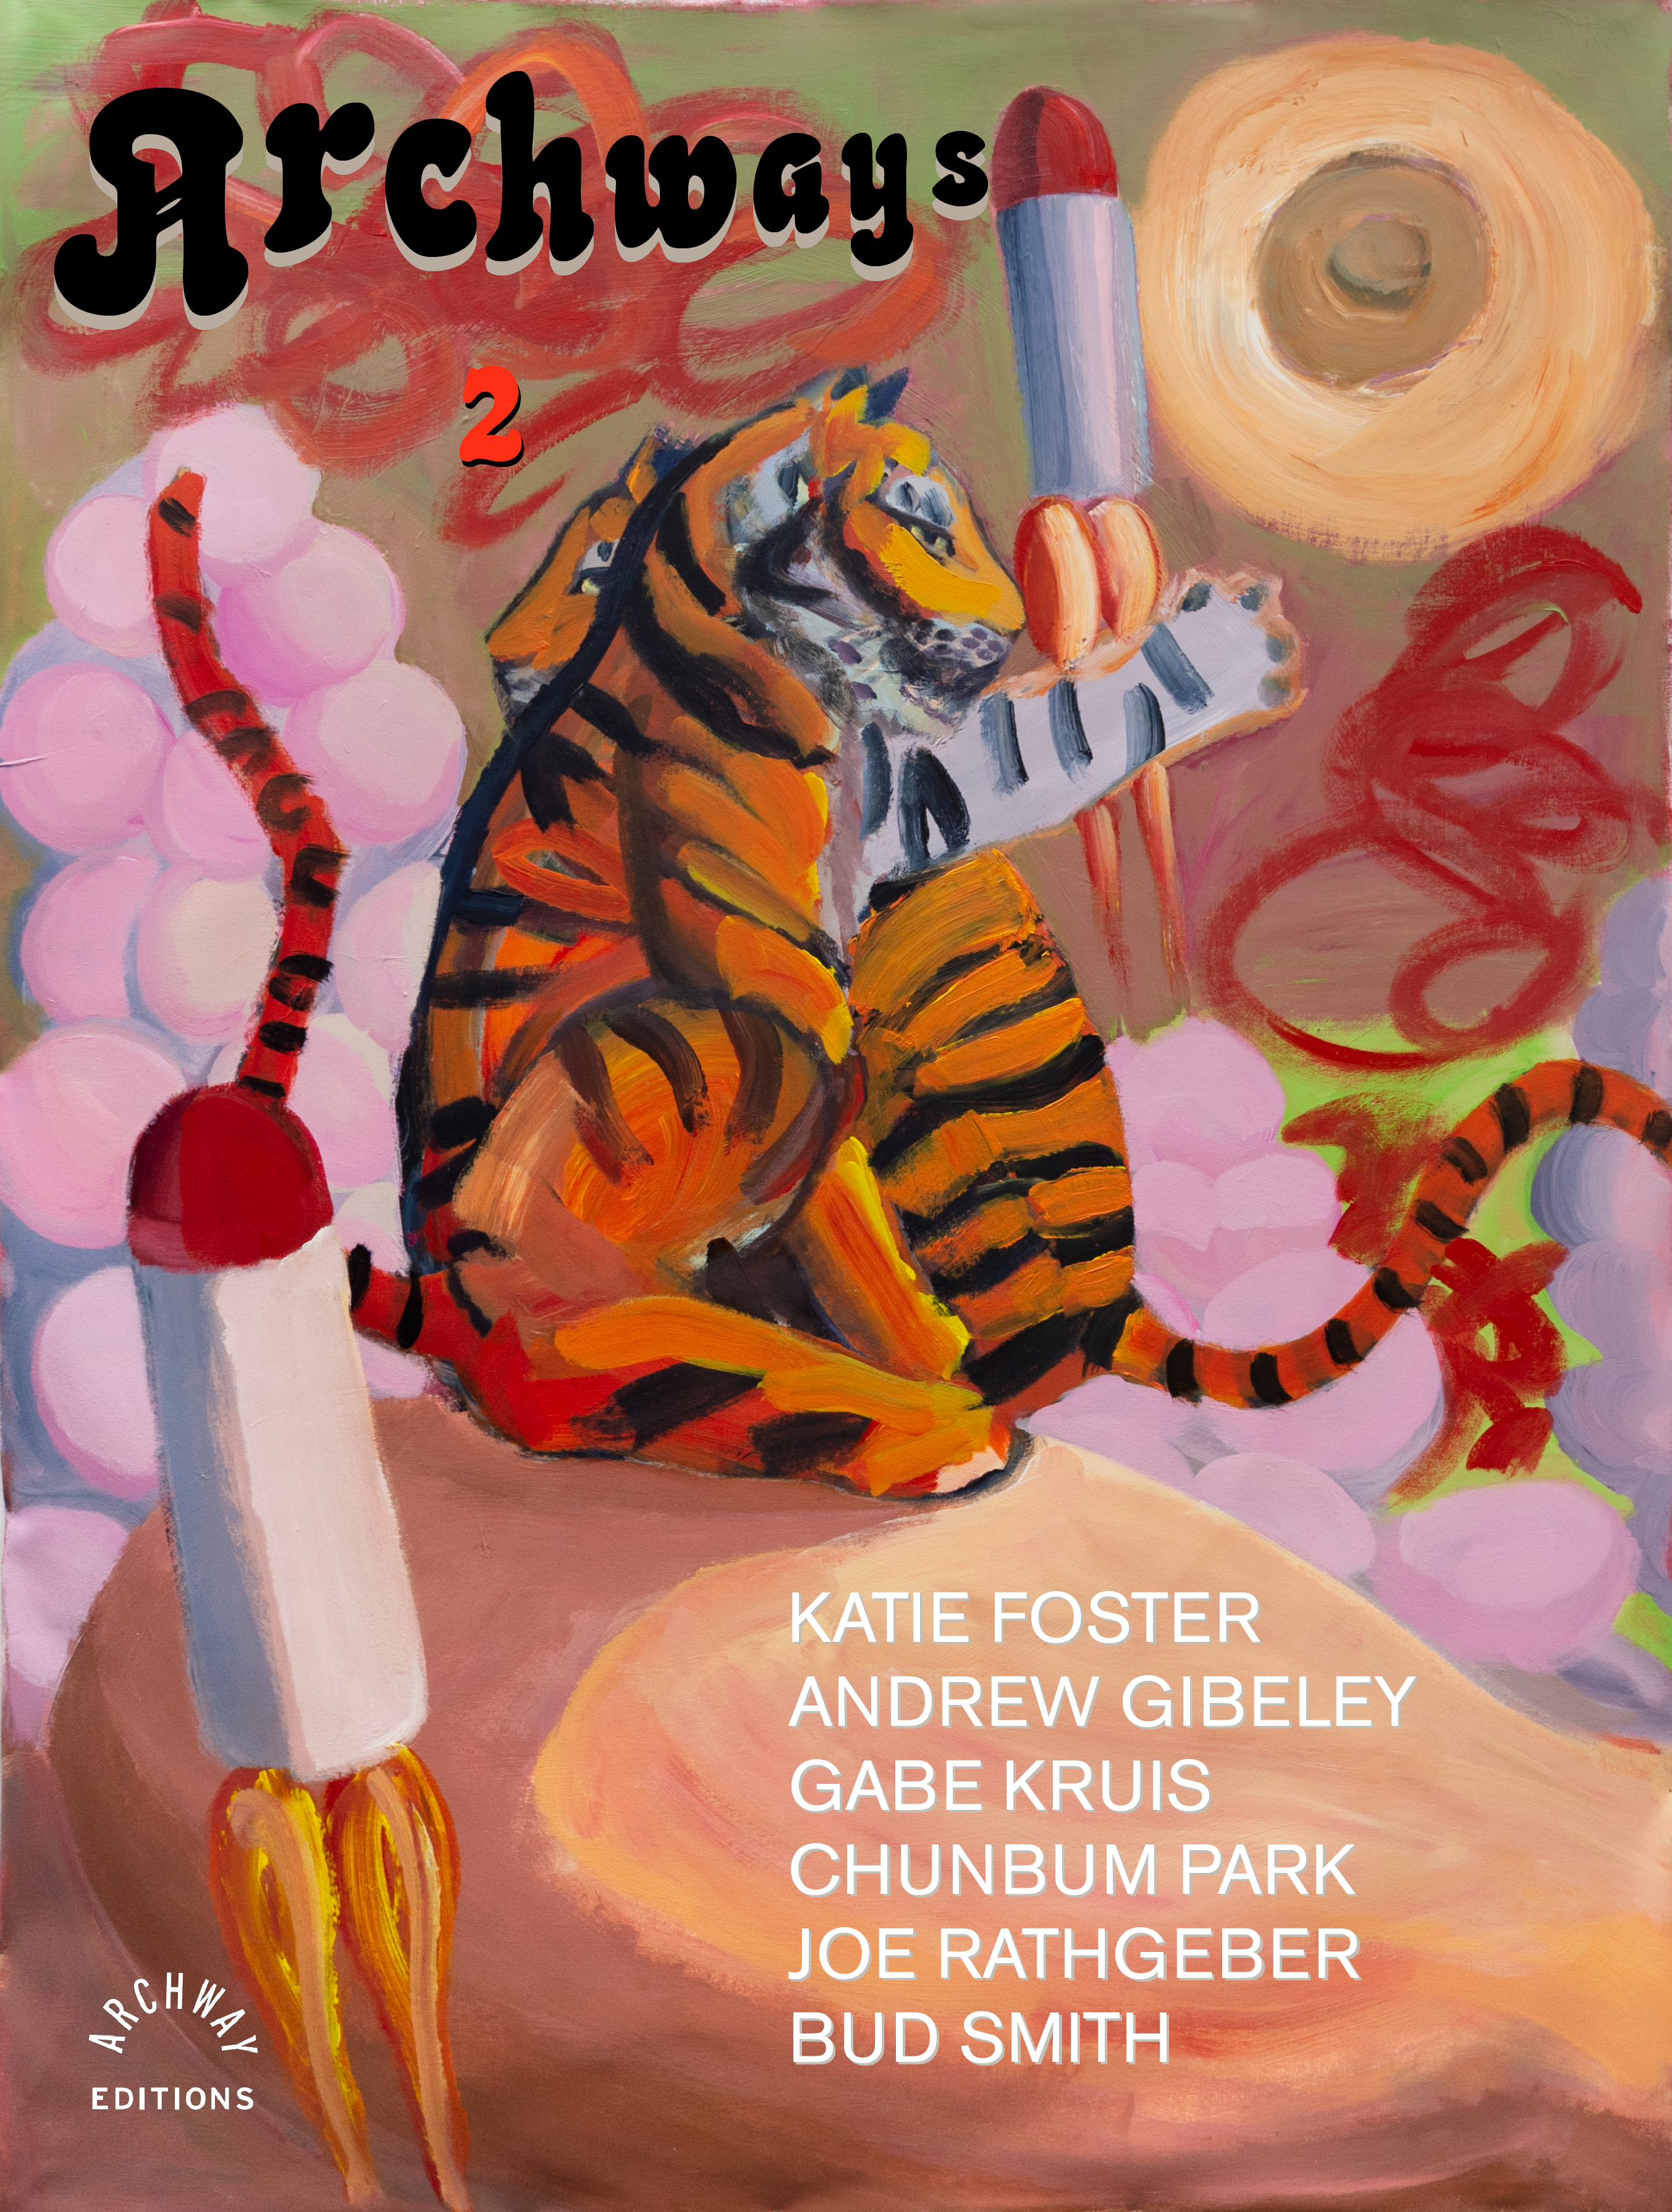 Archways 2 featuring Katie Foster, Andrew Gibeley, Gabe Kruis, Chunbum Park, Joseph Rathgeber and Bud Smith